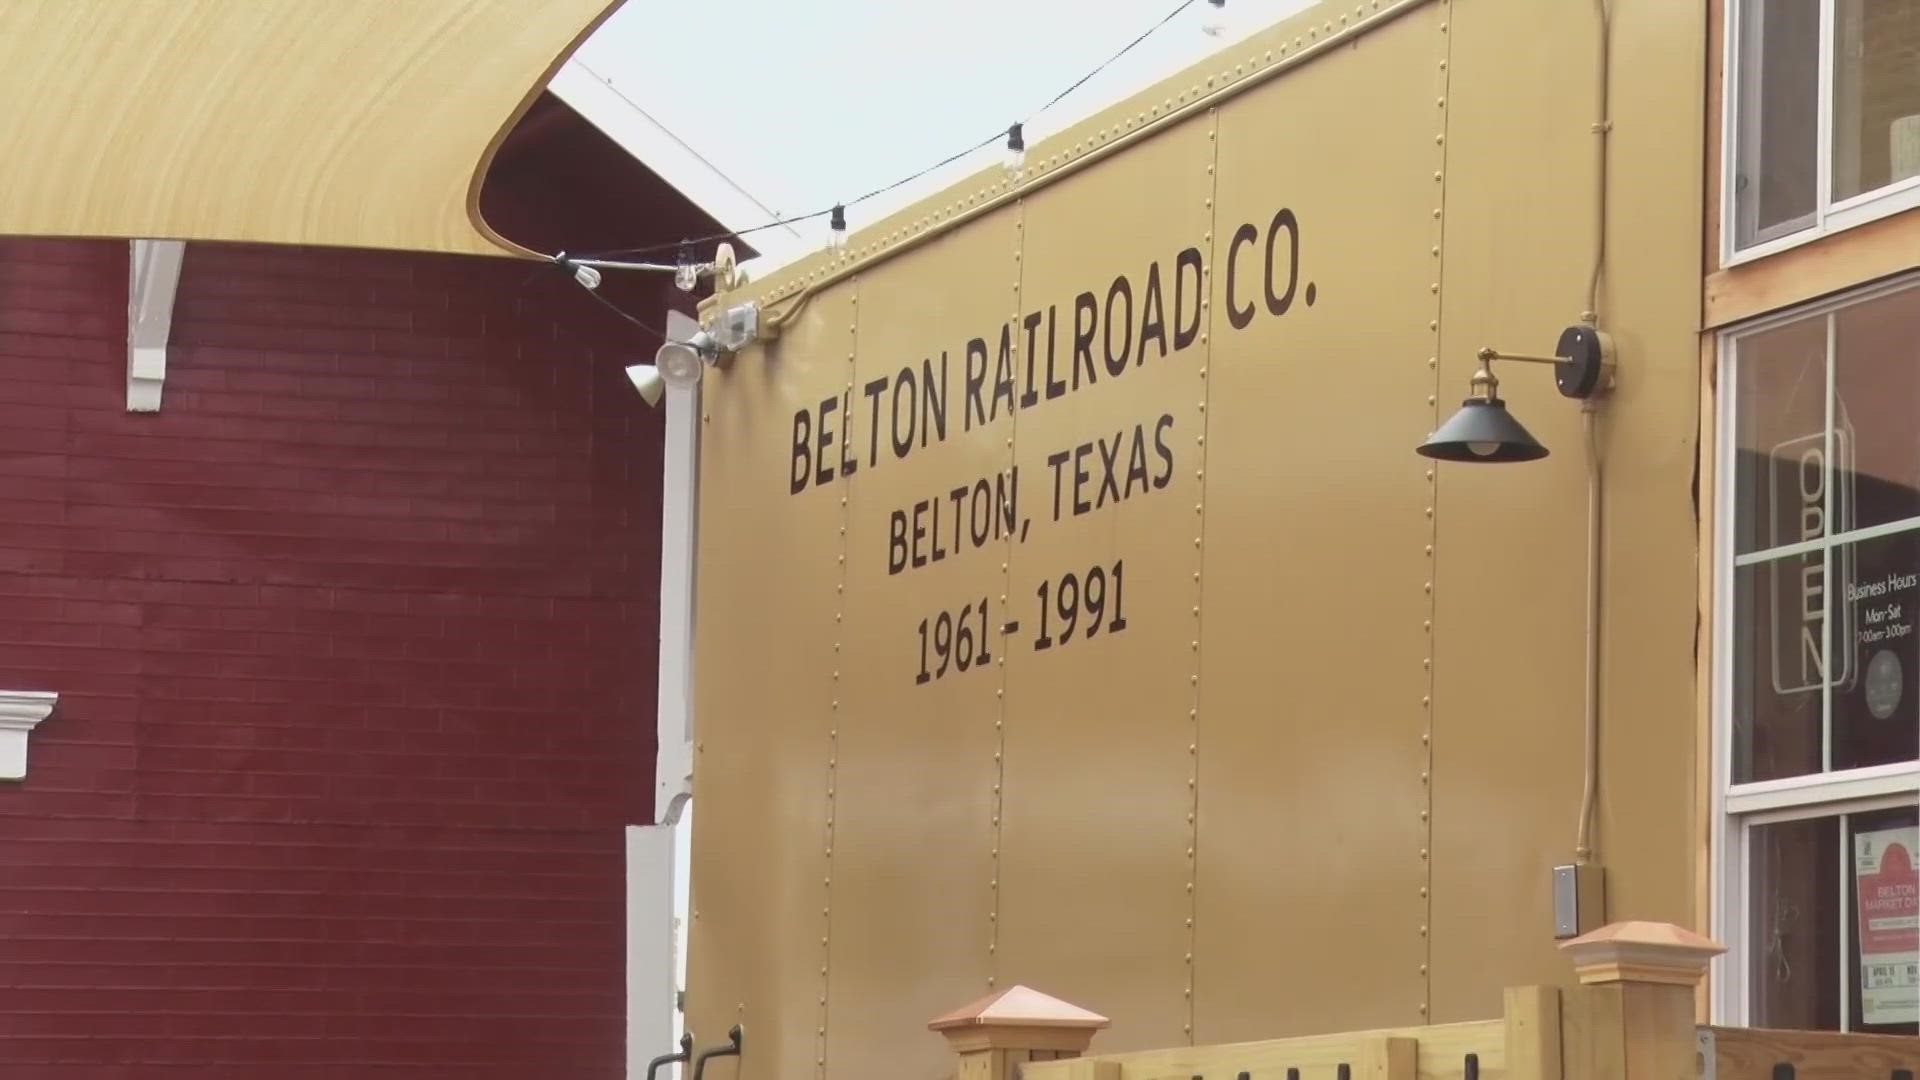 A refreshed, historic space is bringing new life to downtown Belton.